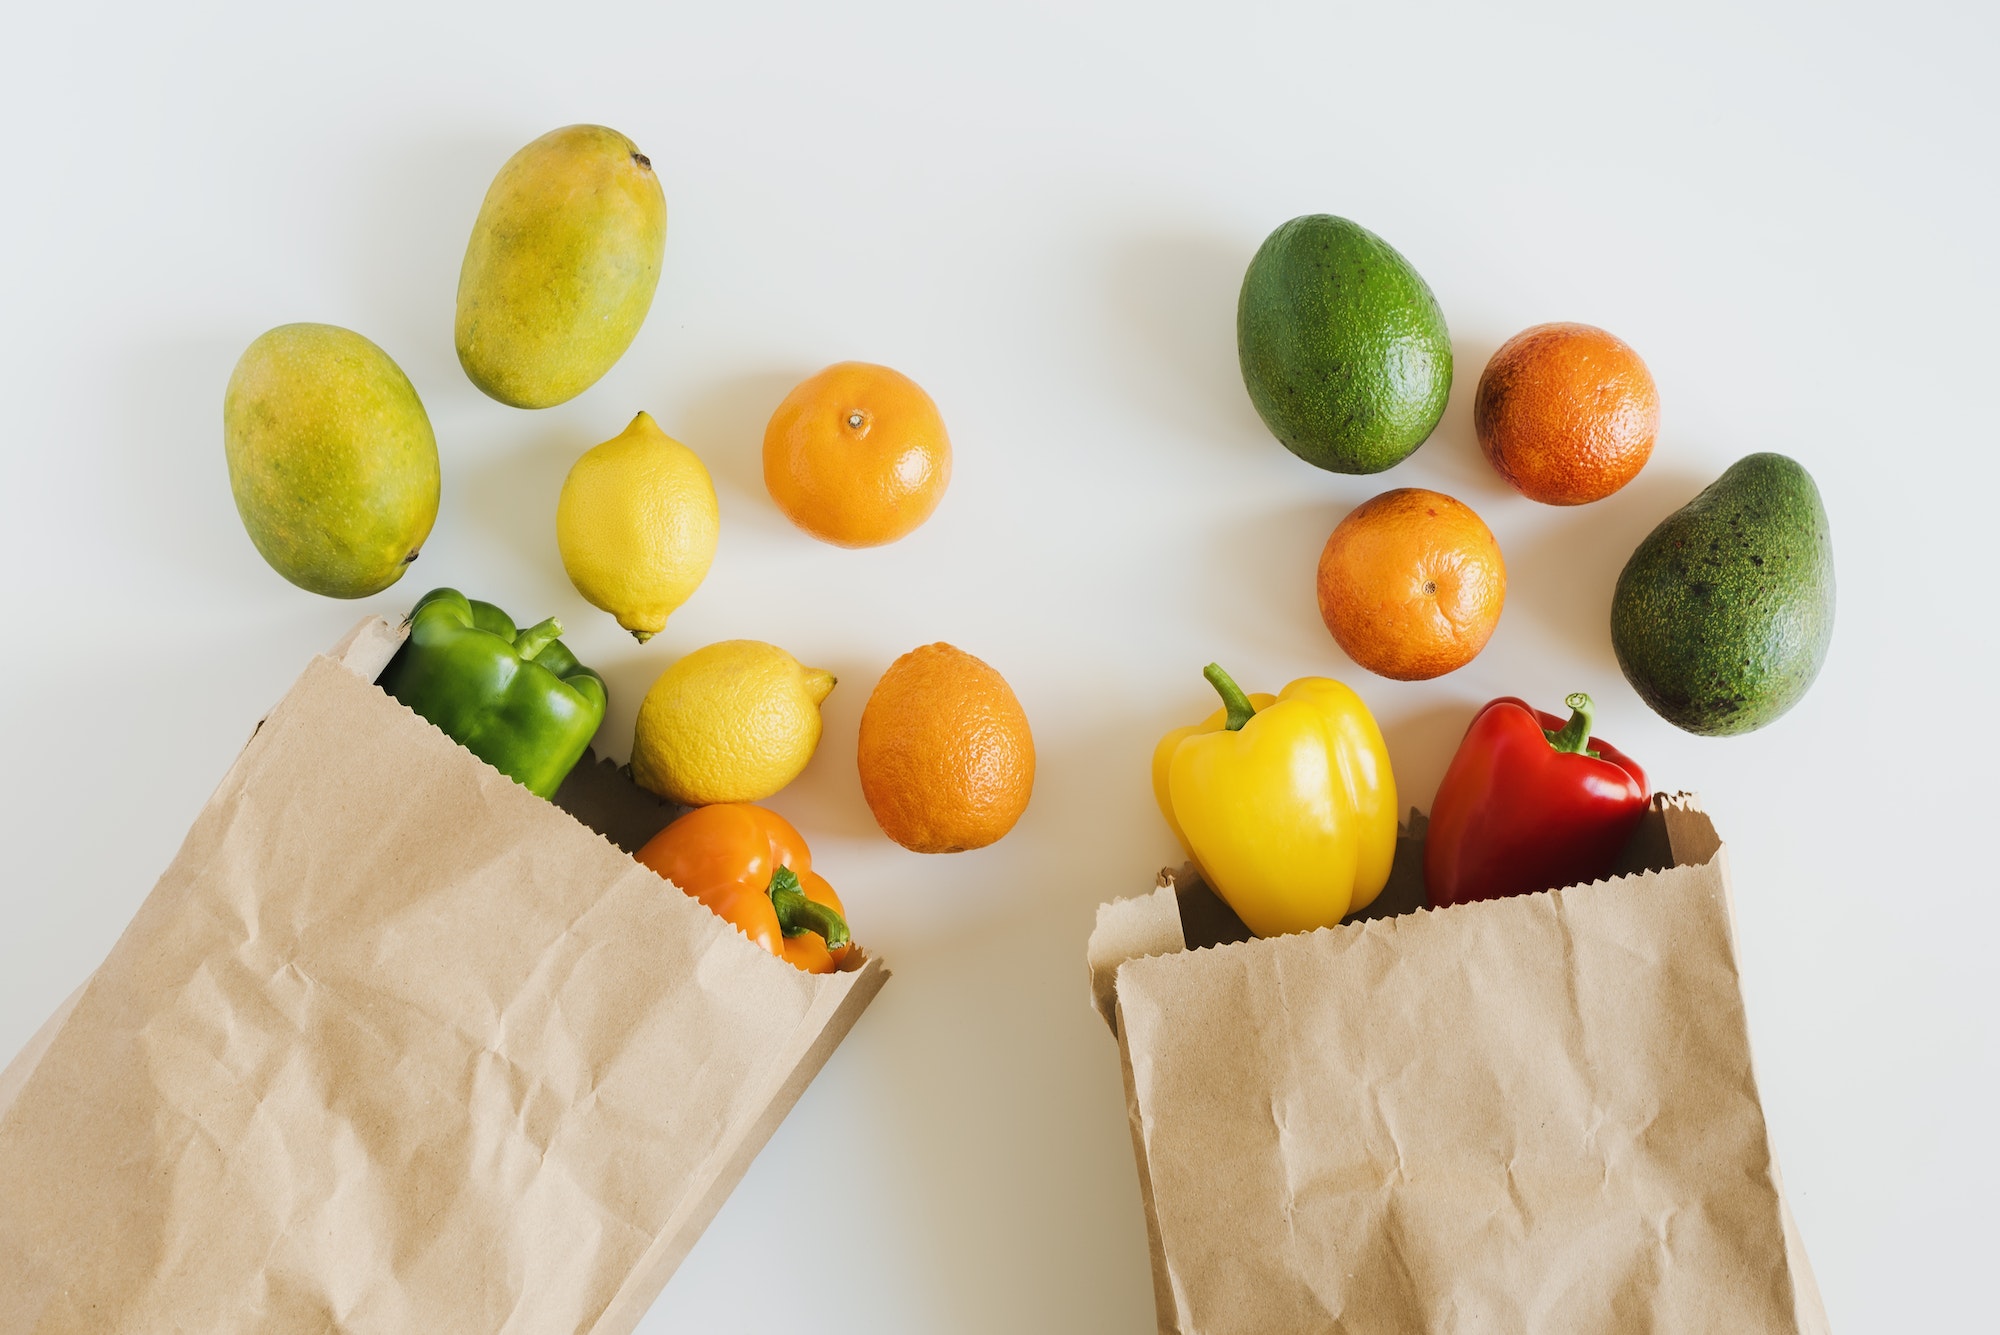 Fruits and veggies in brown recycable paper bags